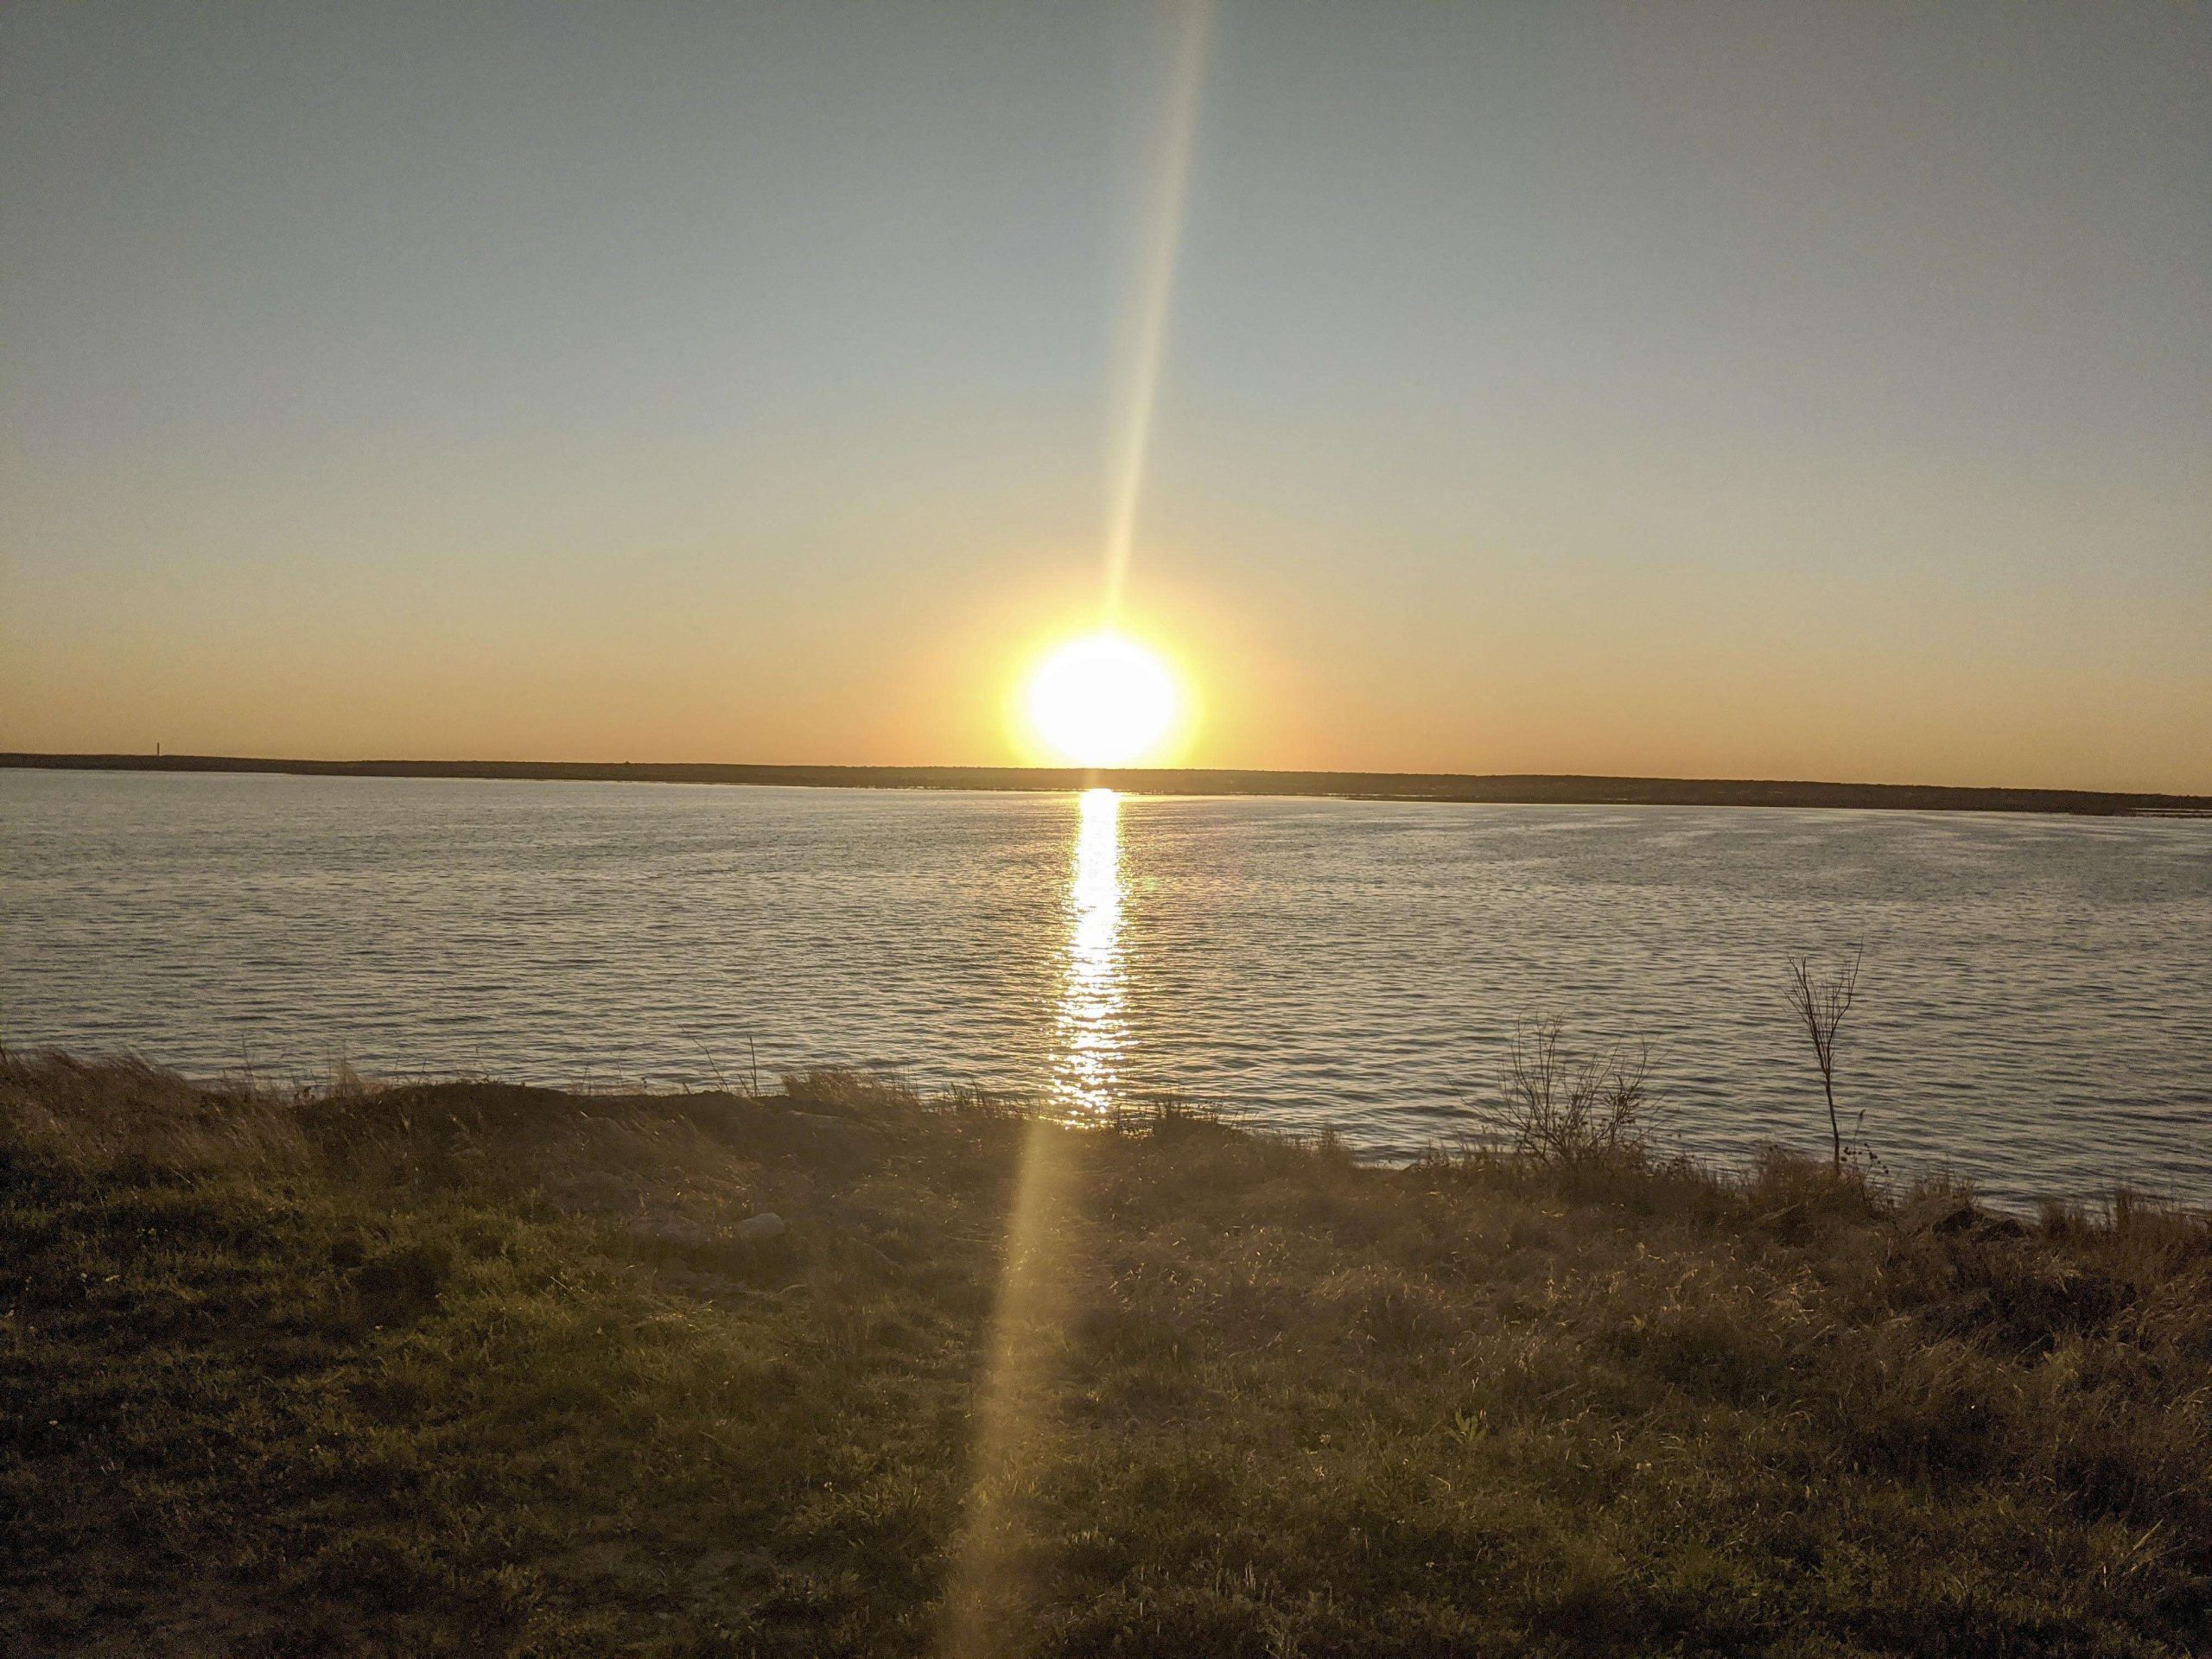 <h4>3. O.H. Ivie, Texas</h4>[20,000 acres] <BR>For one 10-day stretch in February 2021, O.H. Ivie might have been the best bass fishery in the world, producing six Legacy ShareLunkers weighing more than 13 pounds. Among them was a lake record of 16.40-pounds caught by Joe McKay, which was the 16th-biggest largemouth in Texas history and the biggest bass caught statewide in 22 years. That mule anchored an astonishing 60-pound stringer McKay and fishing partner Ben Milliken caught.